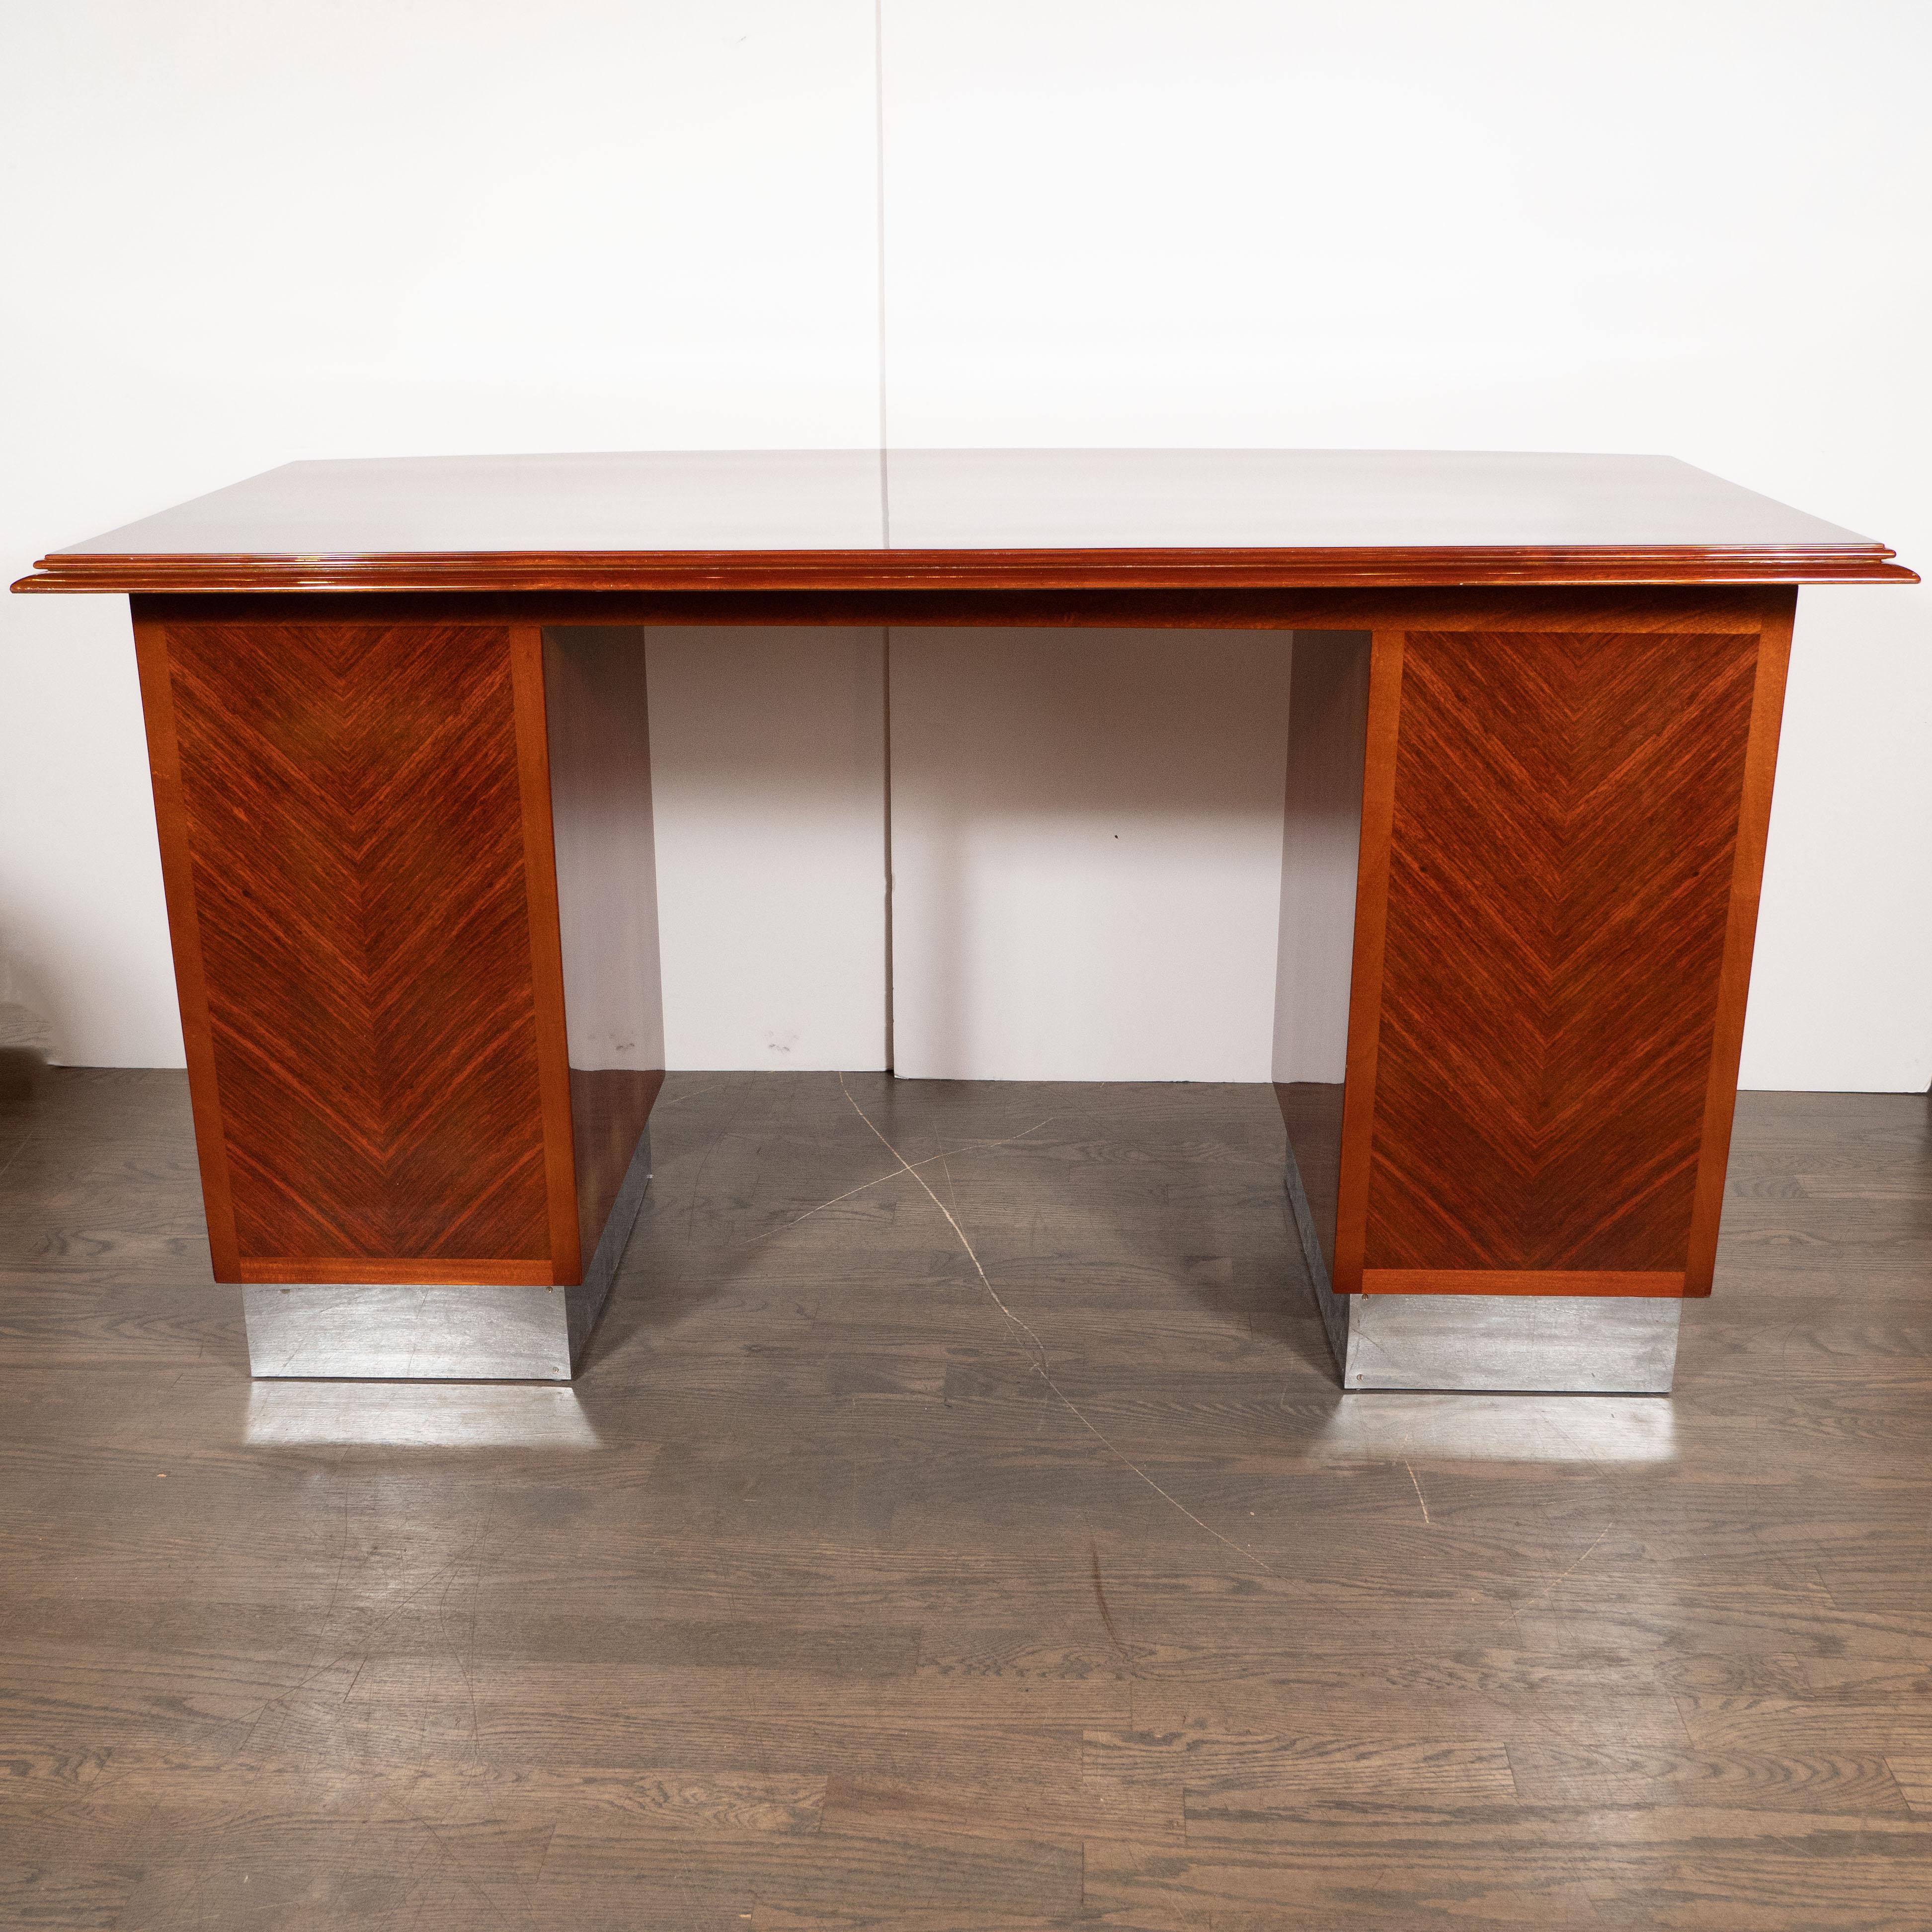 Art Deco Machine Age Bookmatched Bowfront Rosewood Desk with Nickel Wrapped Base 3